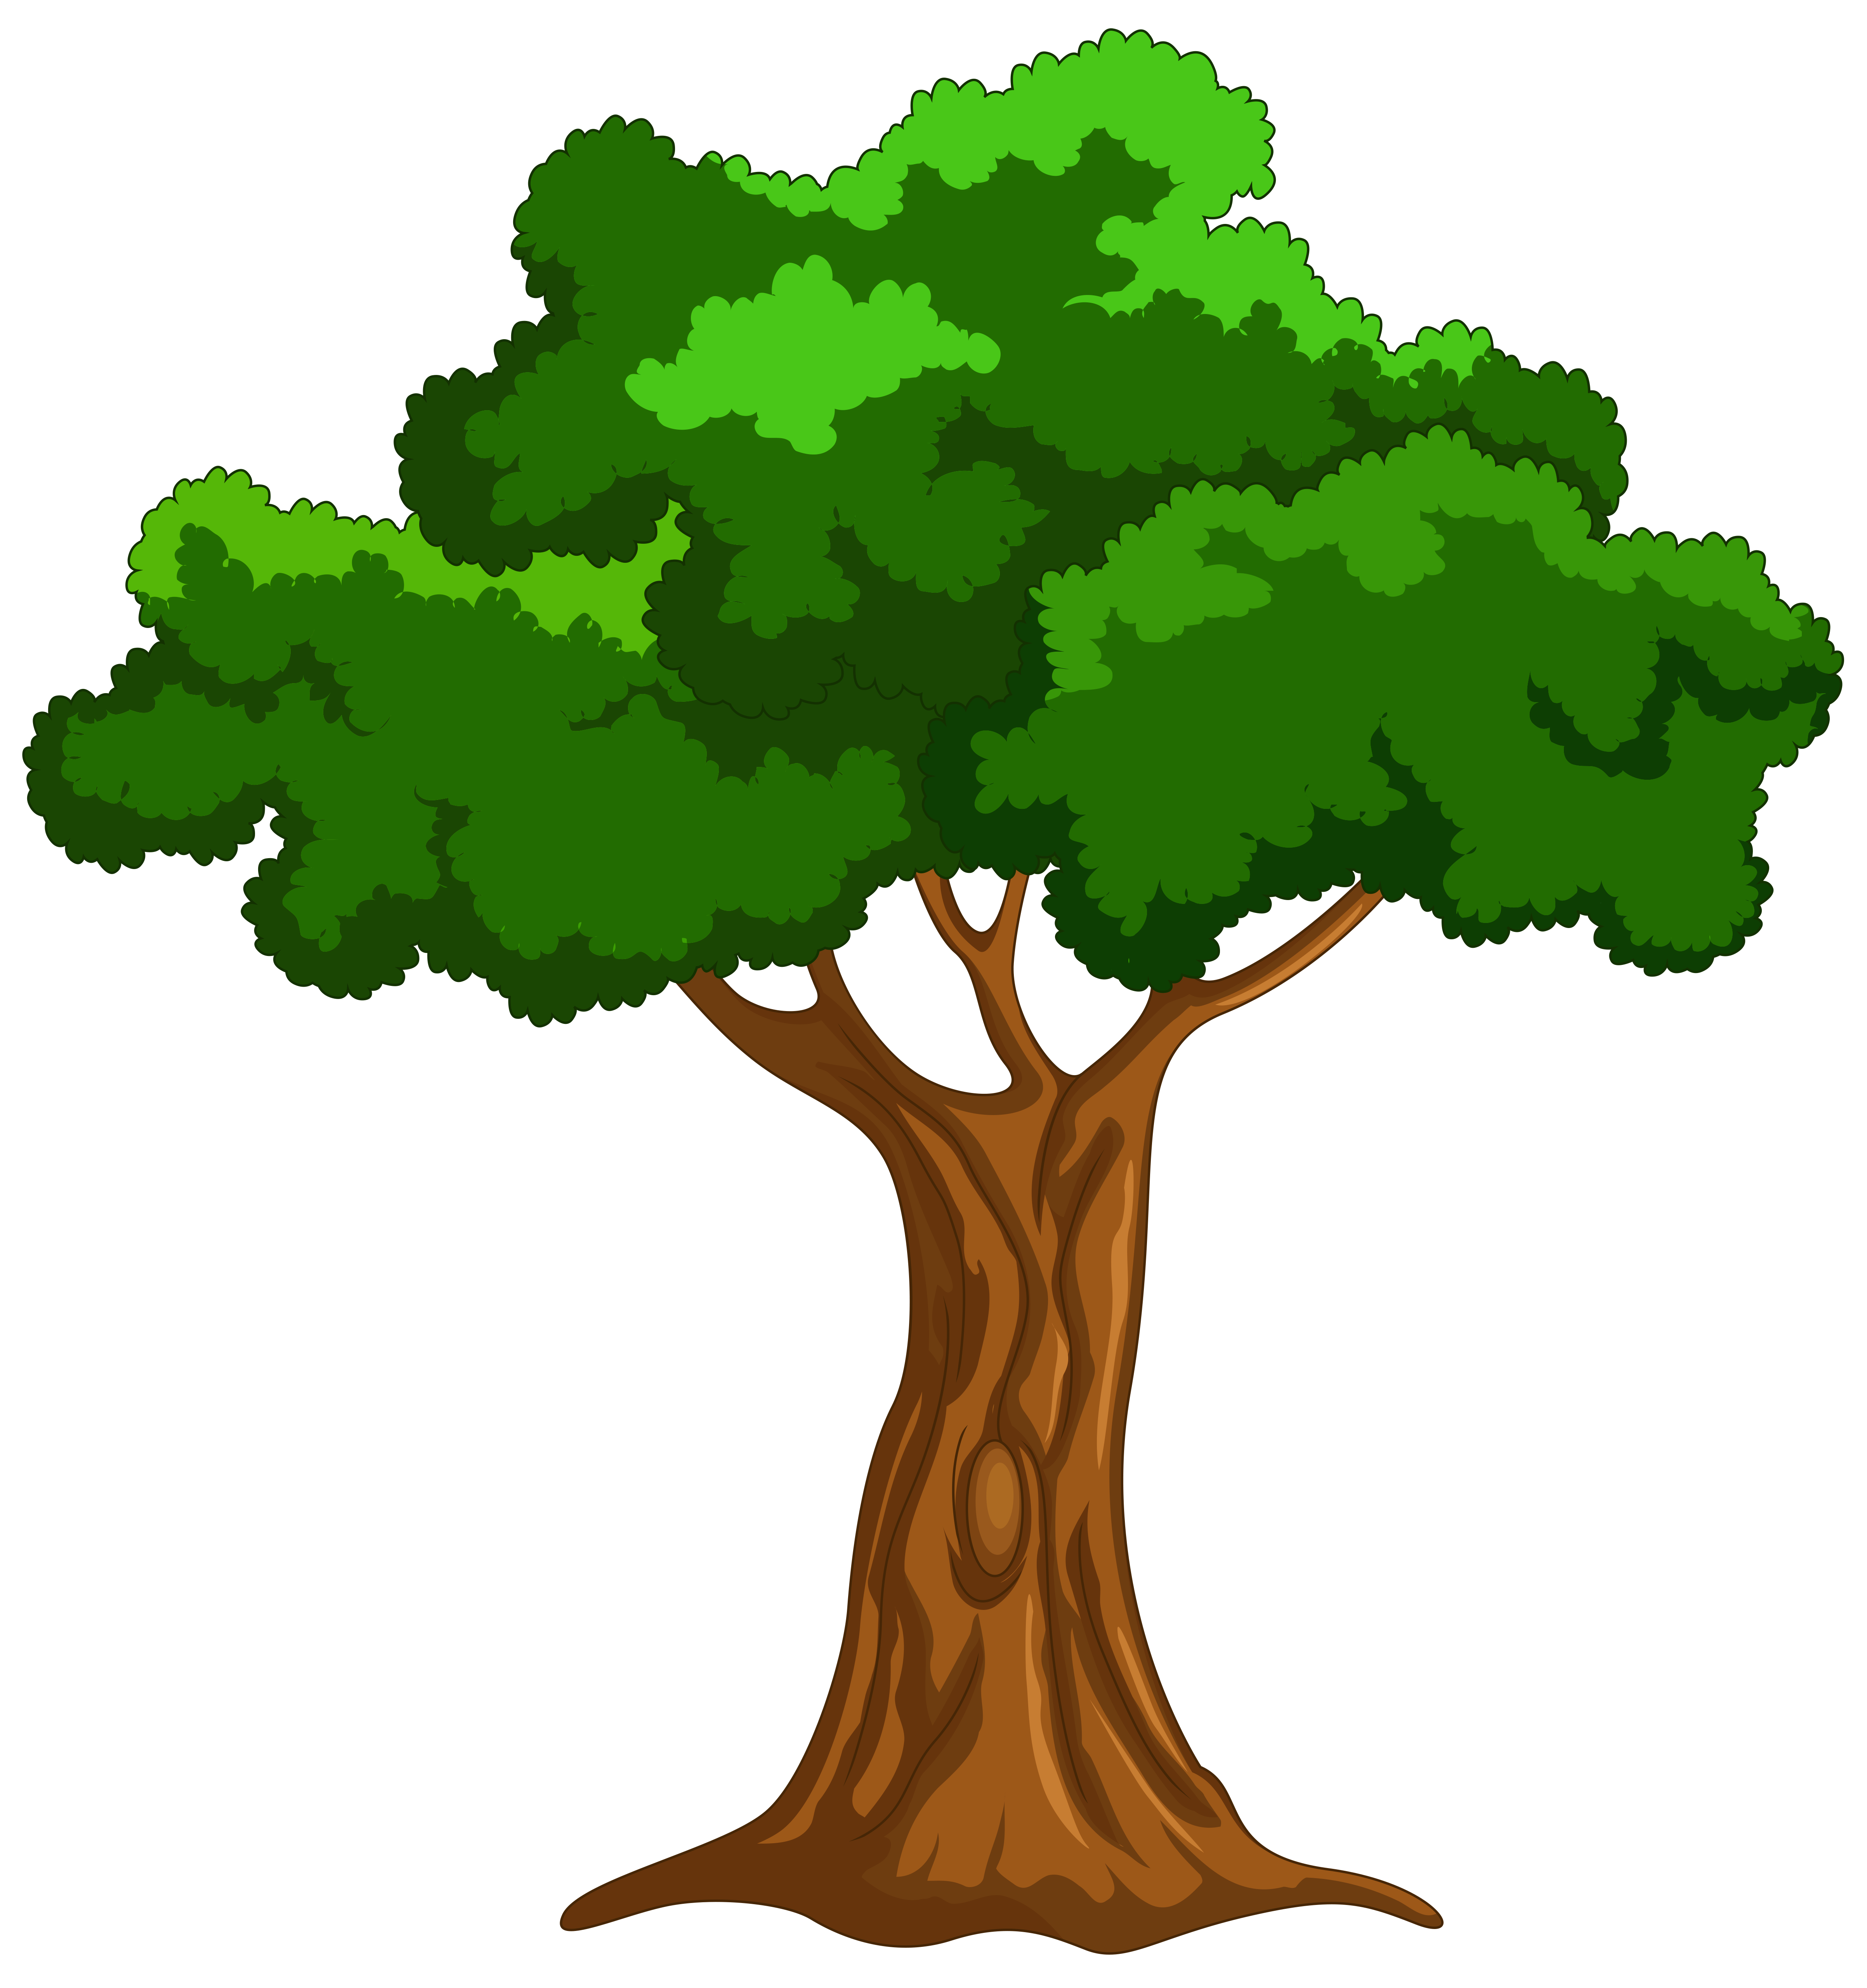 Free Cartoon Trees Png, Download Free Cartoon Trees Png png images